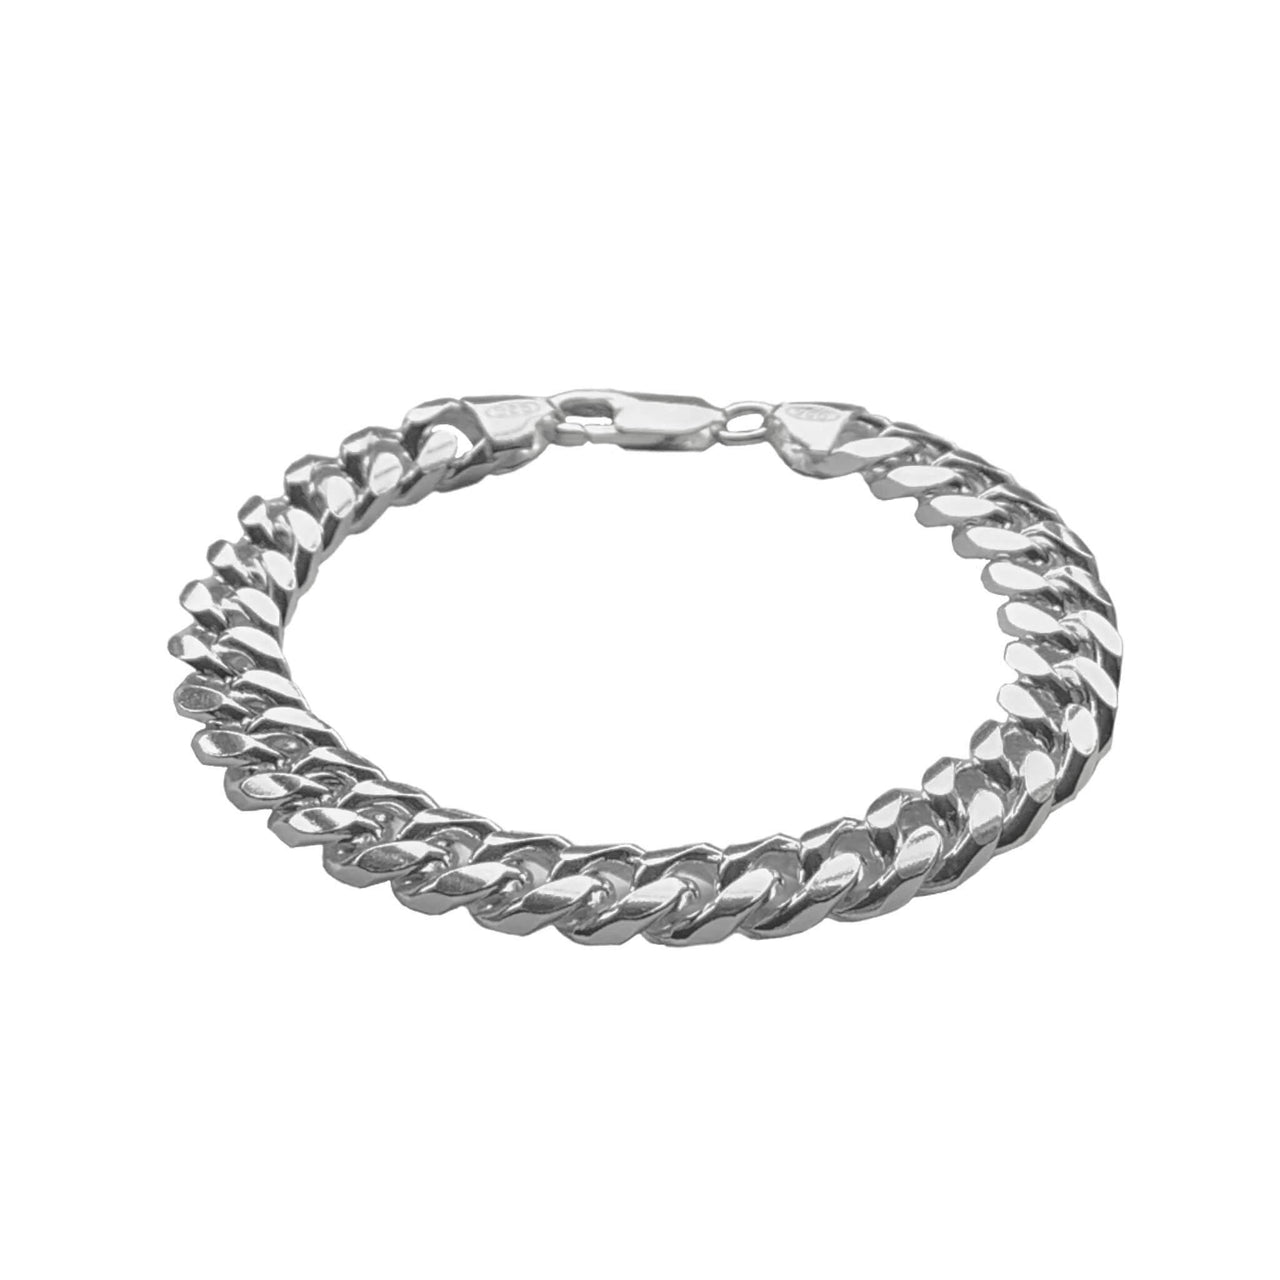 Mens Thick Silver Curb Chain Bracelet 8mm, 7.5 inch 8.5 inch